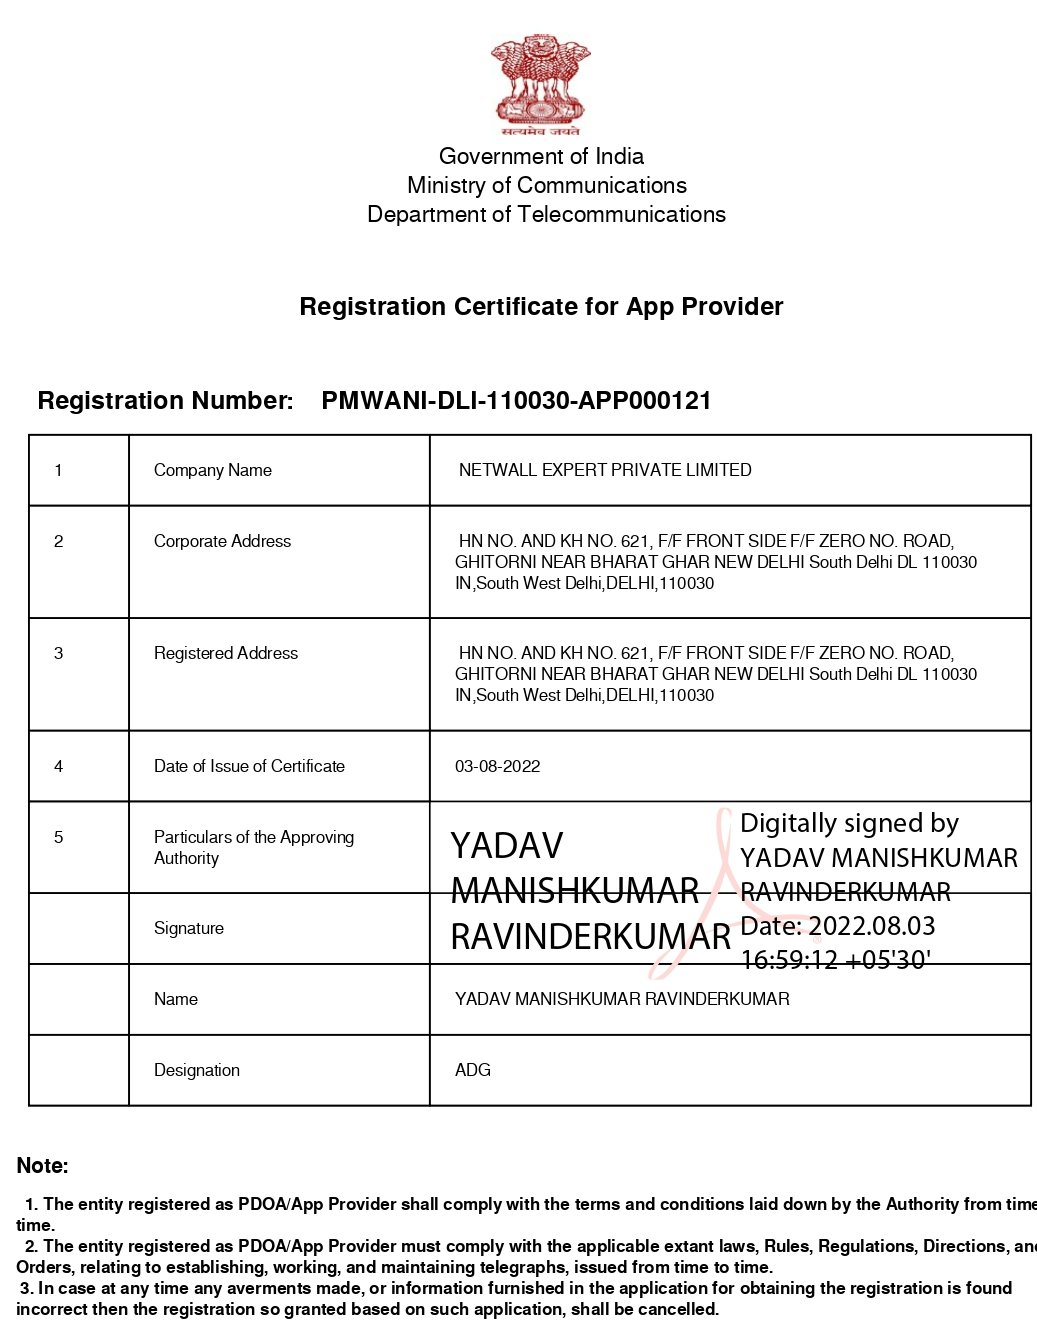 Netwall PM-Wani App Provider Certificate from  Govt of India,Ministry of Communication,Department of Telecommunication,DOT 